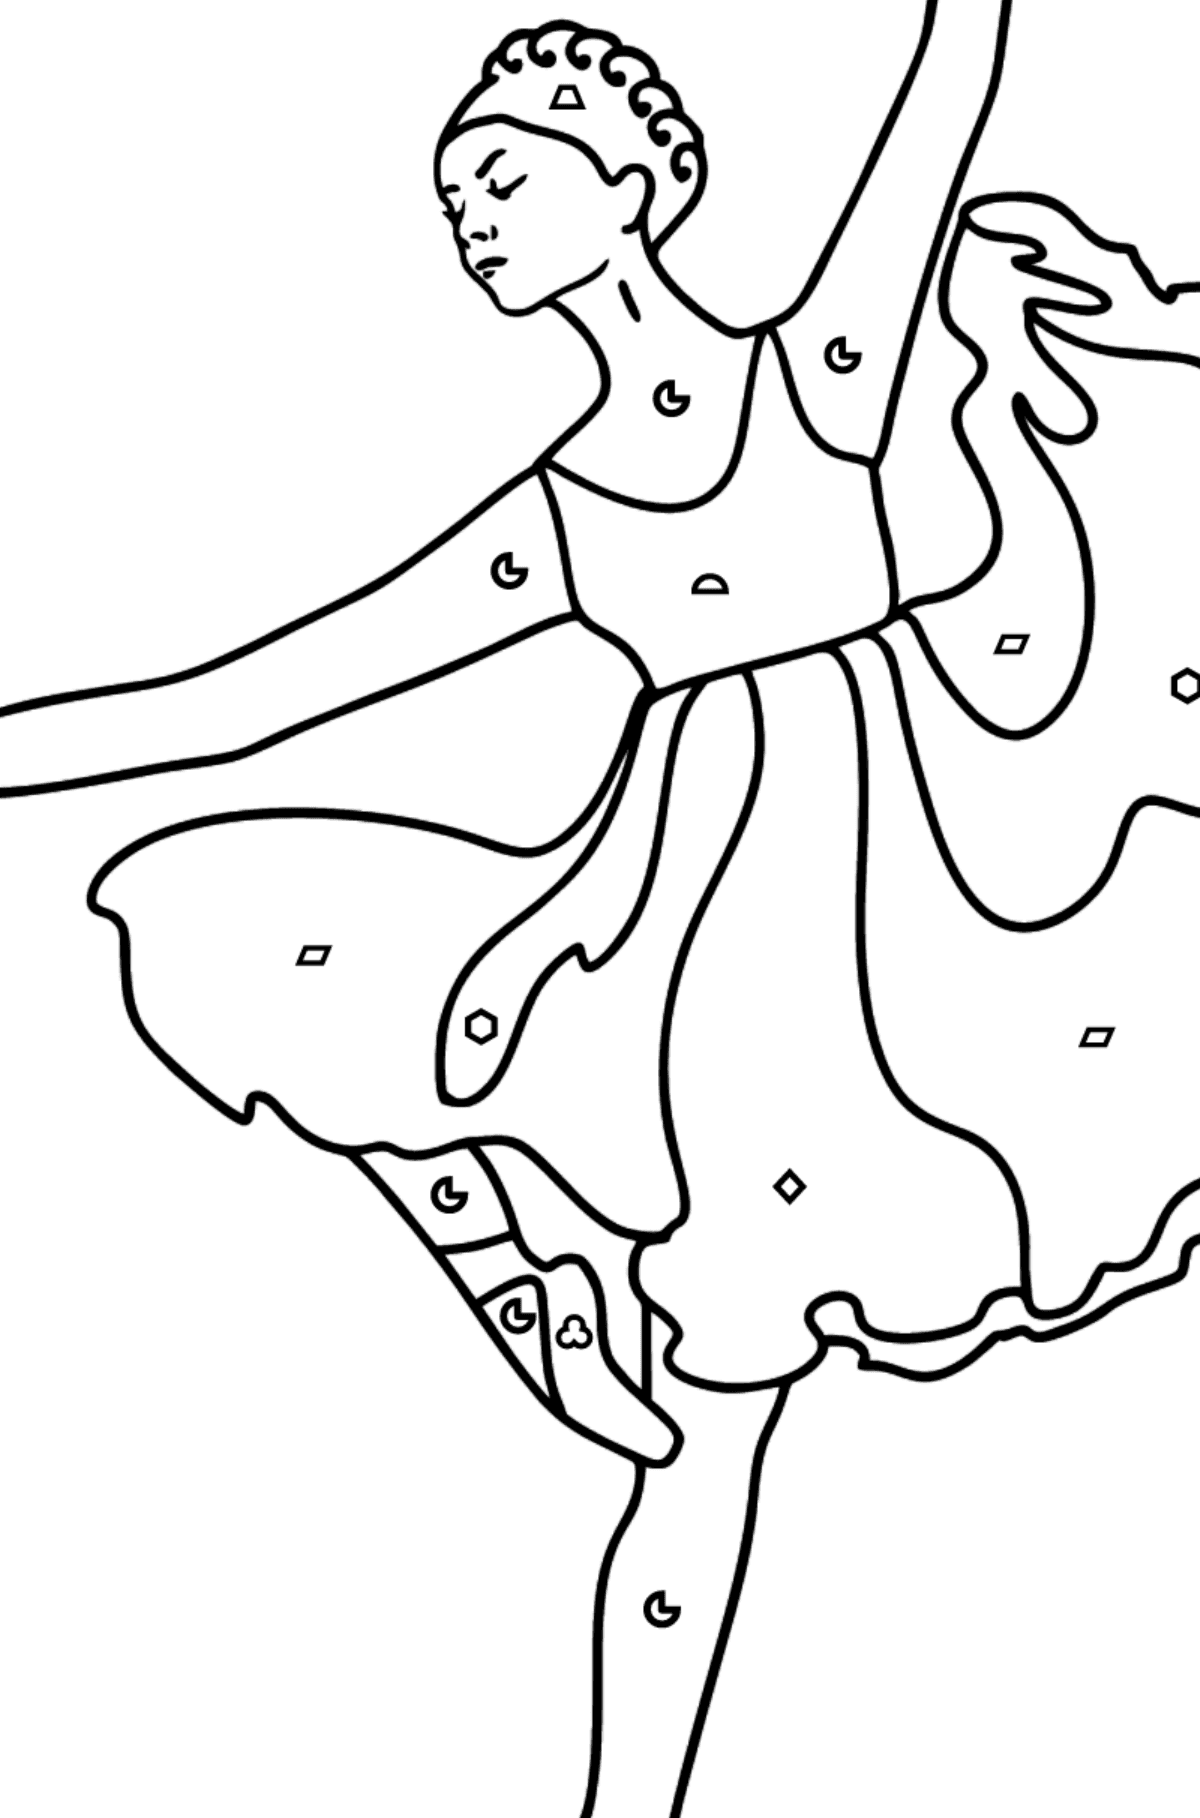 Ballerina in Lilac Dress coloring page - Coloring by Geometric Shapes for Kids